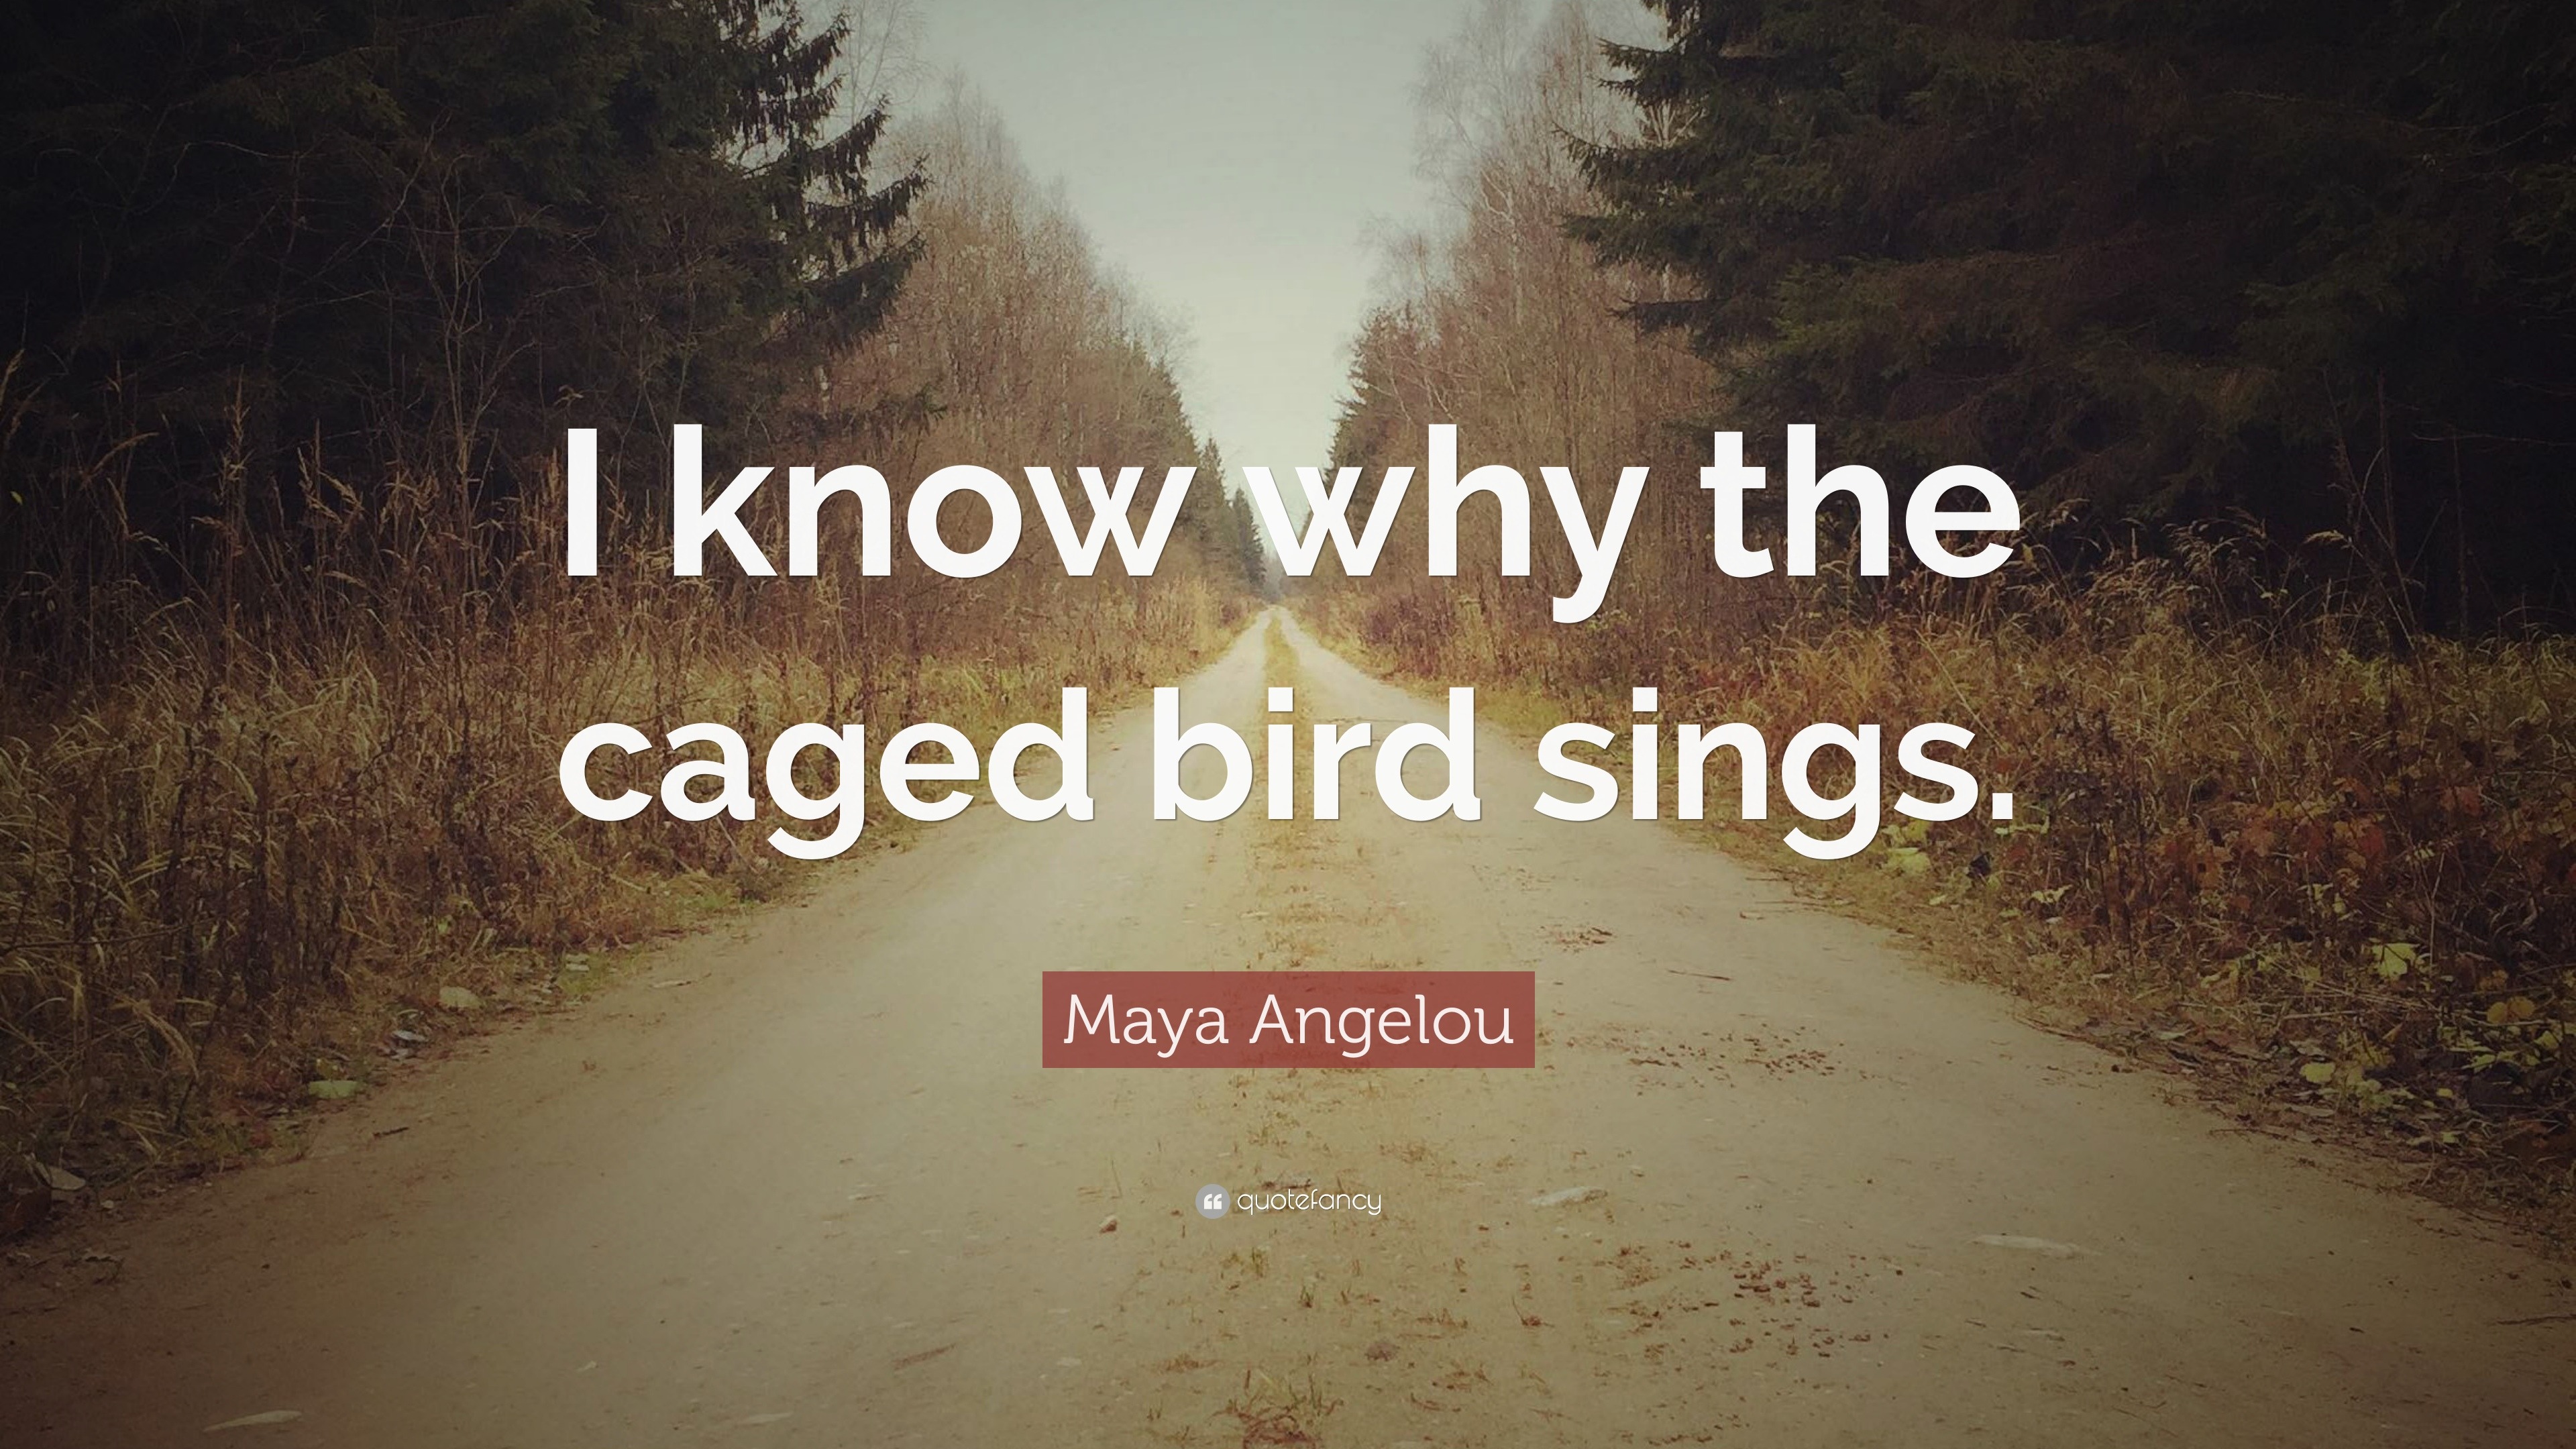 i know why the caged bird sings by maya angelou